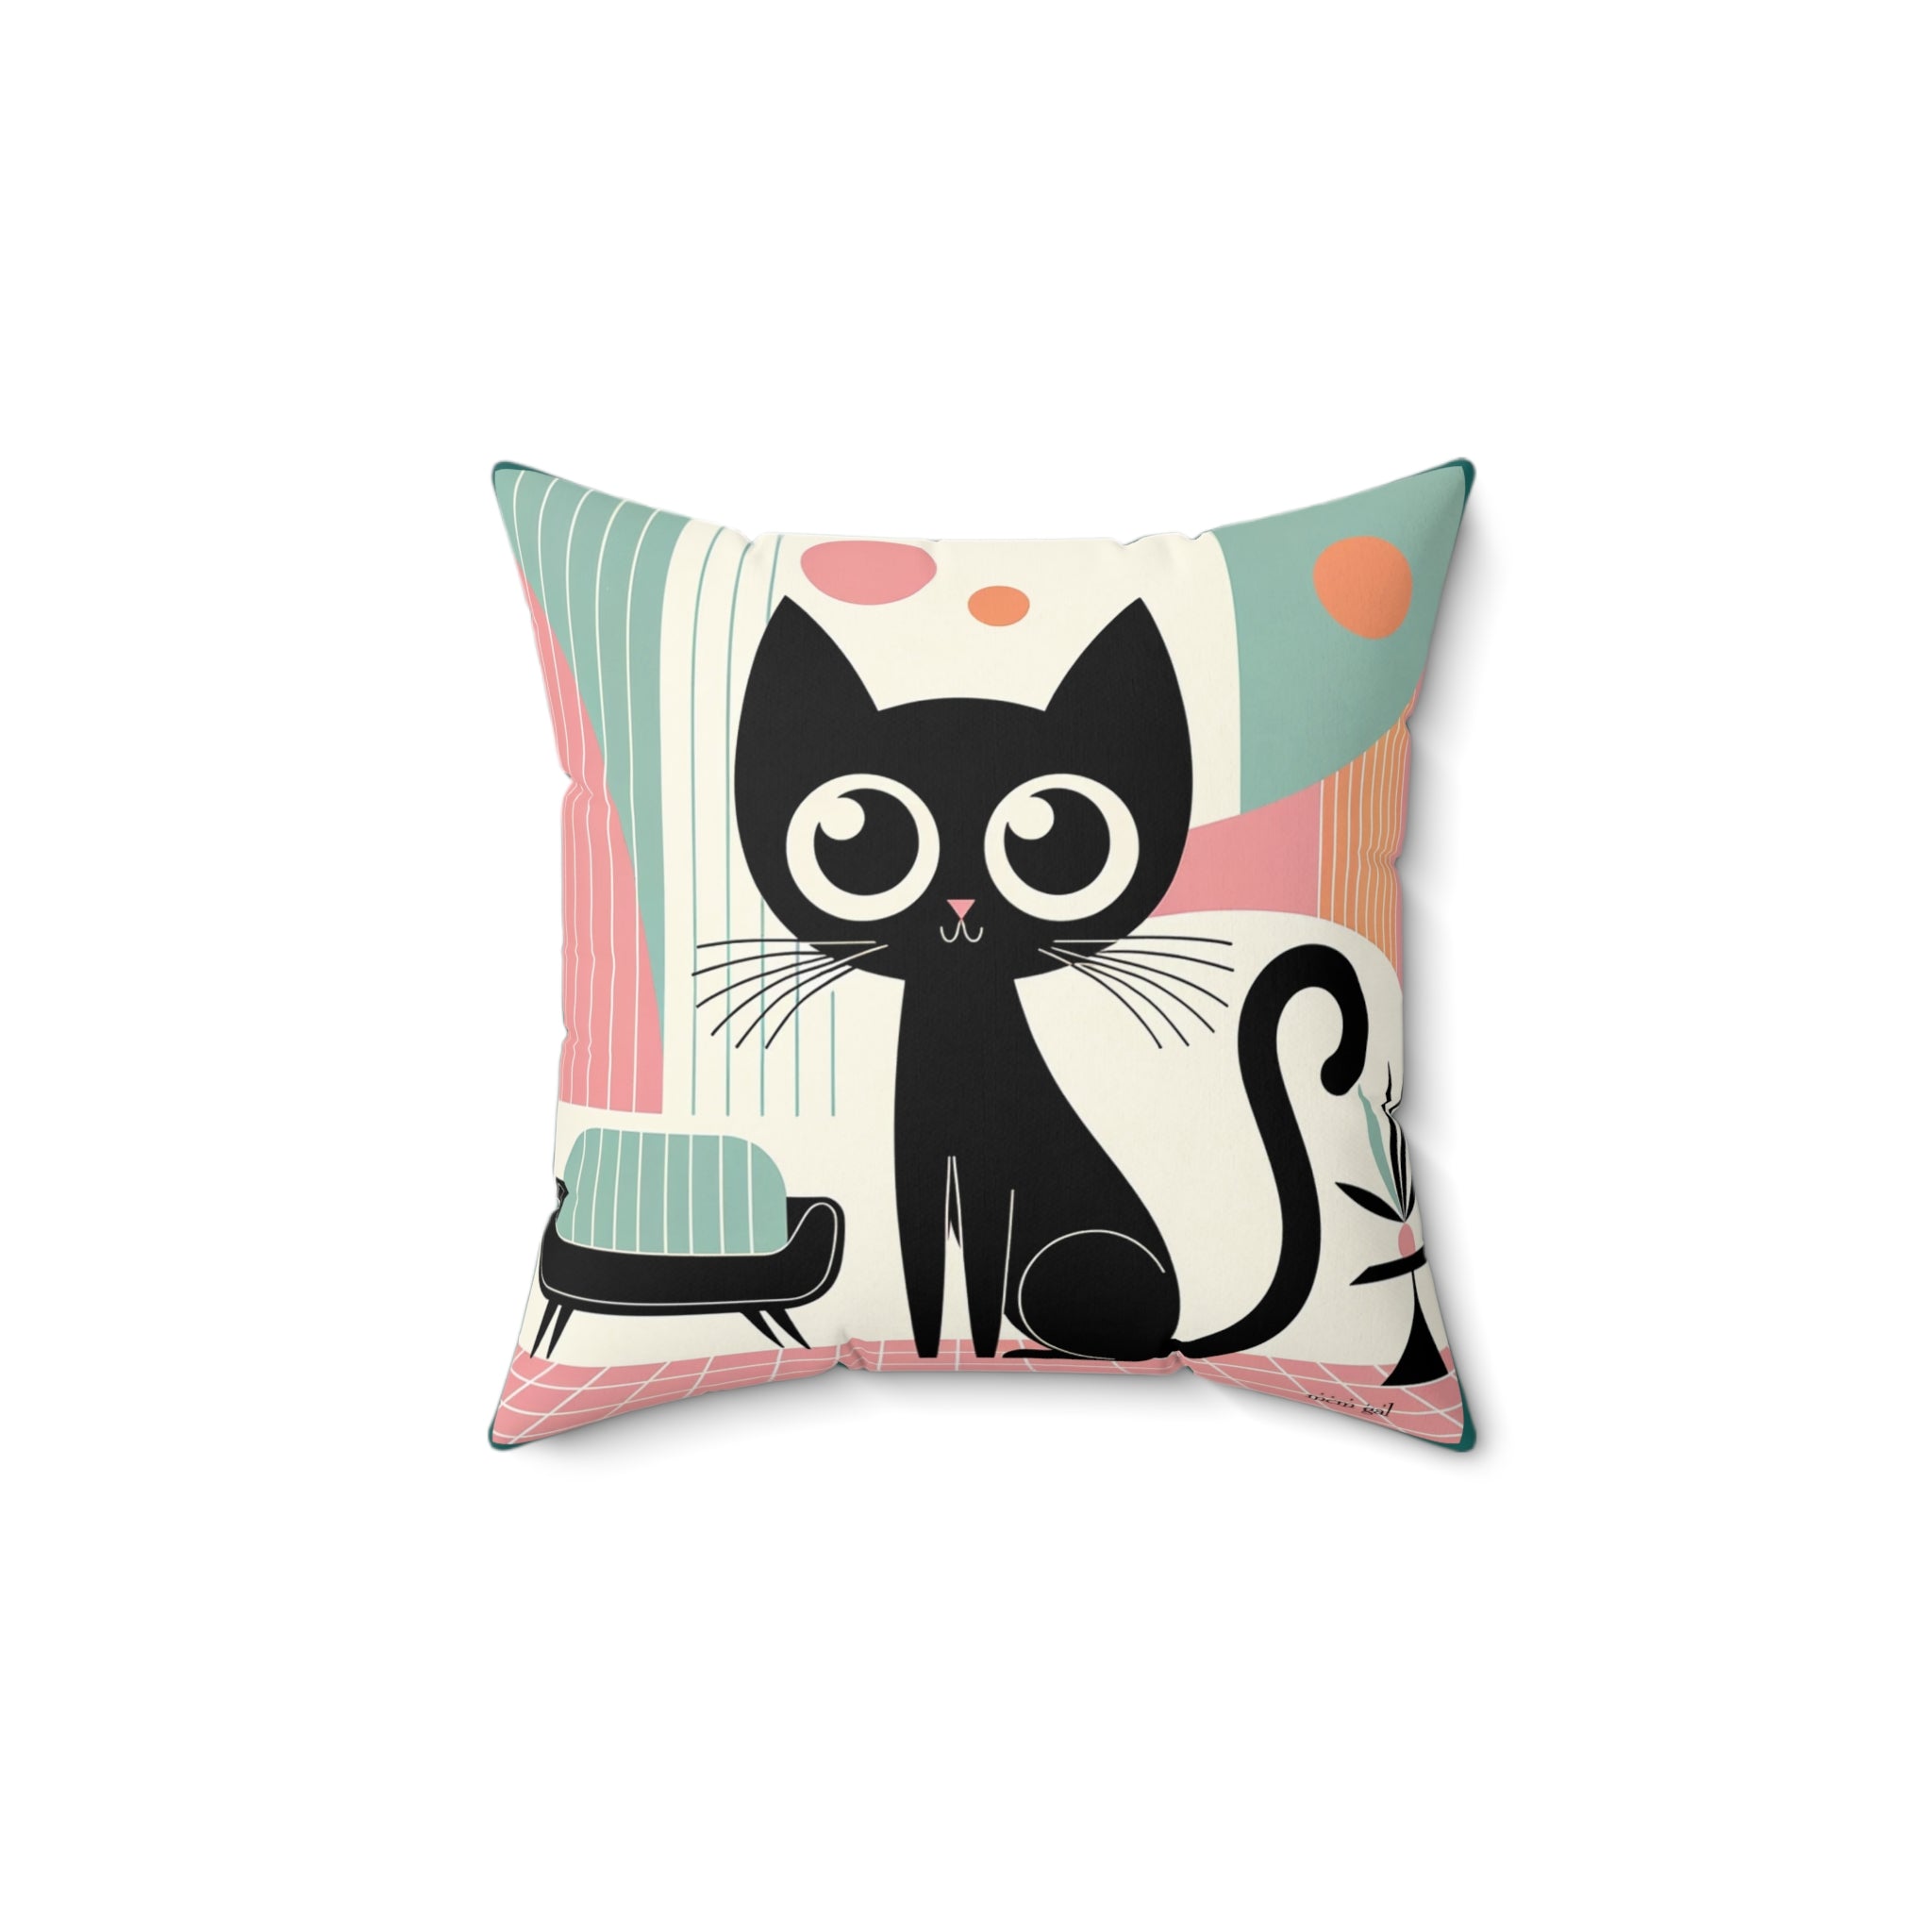 Mid Mod Atomic Cat Kitschy Throw Pillow Including Insert, MCM Home Decor